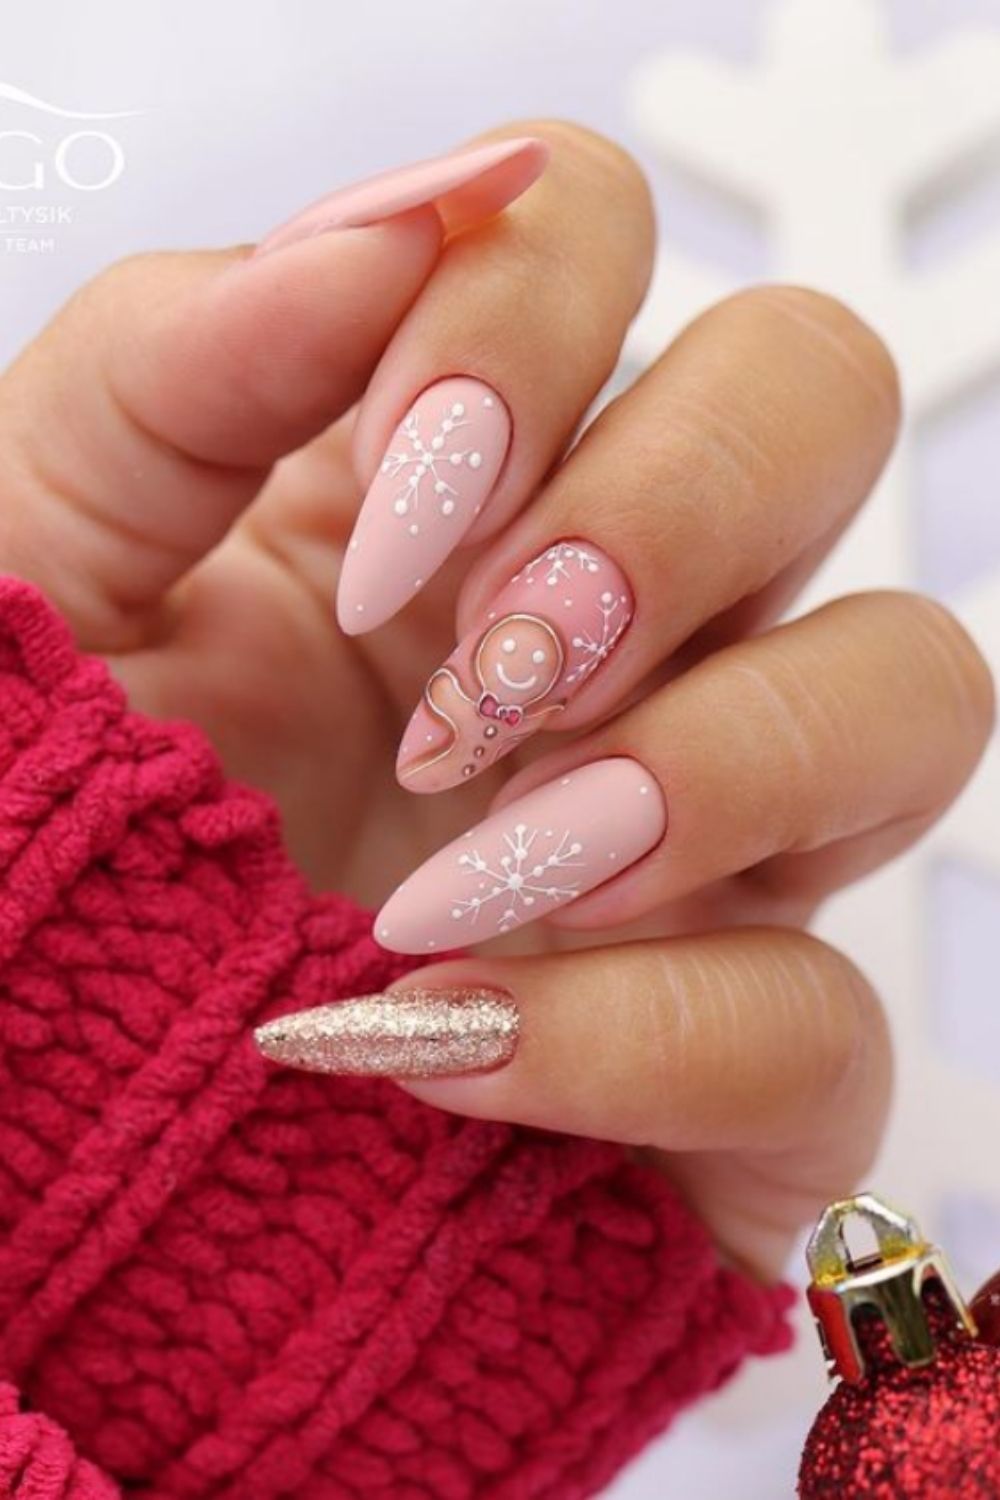 Almond nails with snowflake and little bear